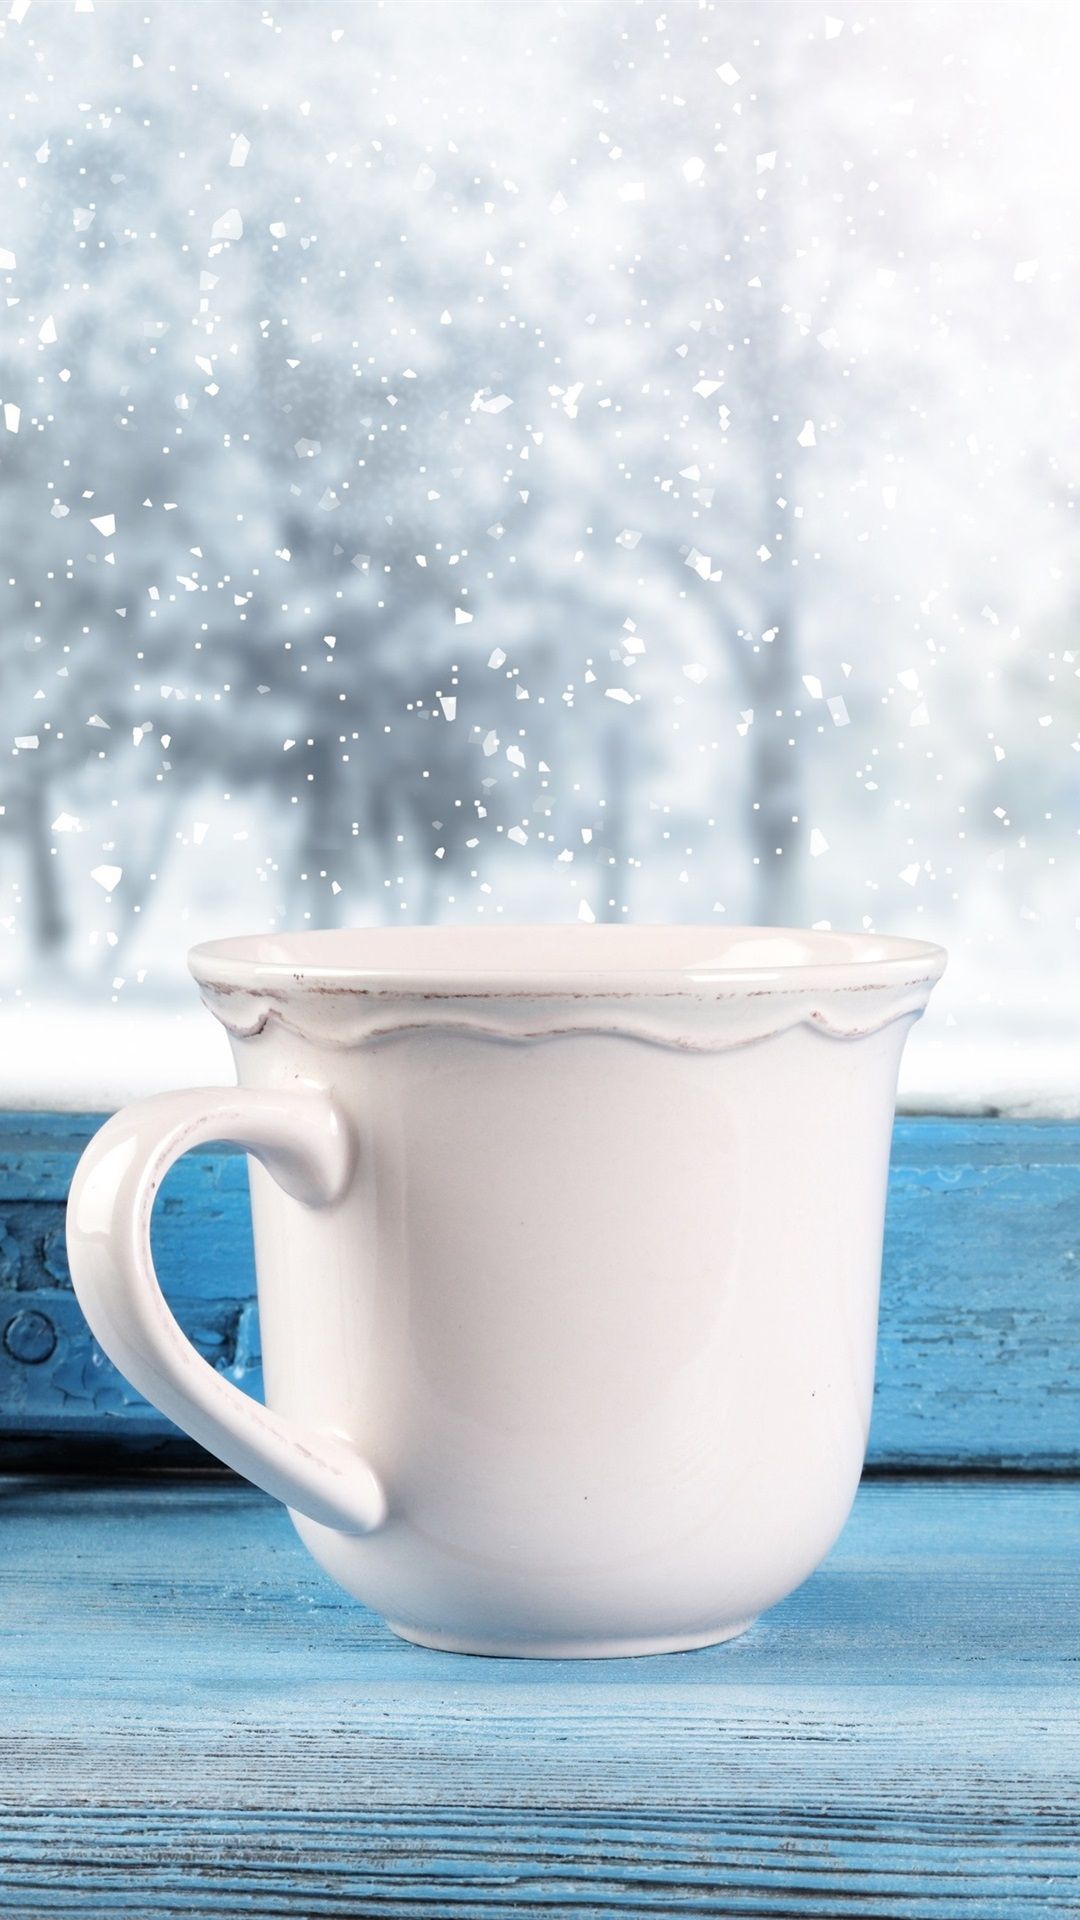 Cup, Window, Snowy, Winter 1080x1920 IPhone 8 7 6 6S Plus Wallpaper, Background, Picture, Image